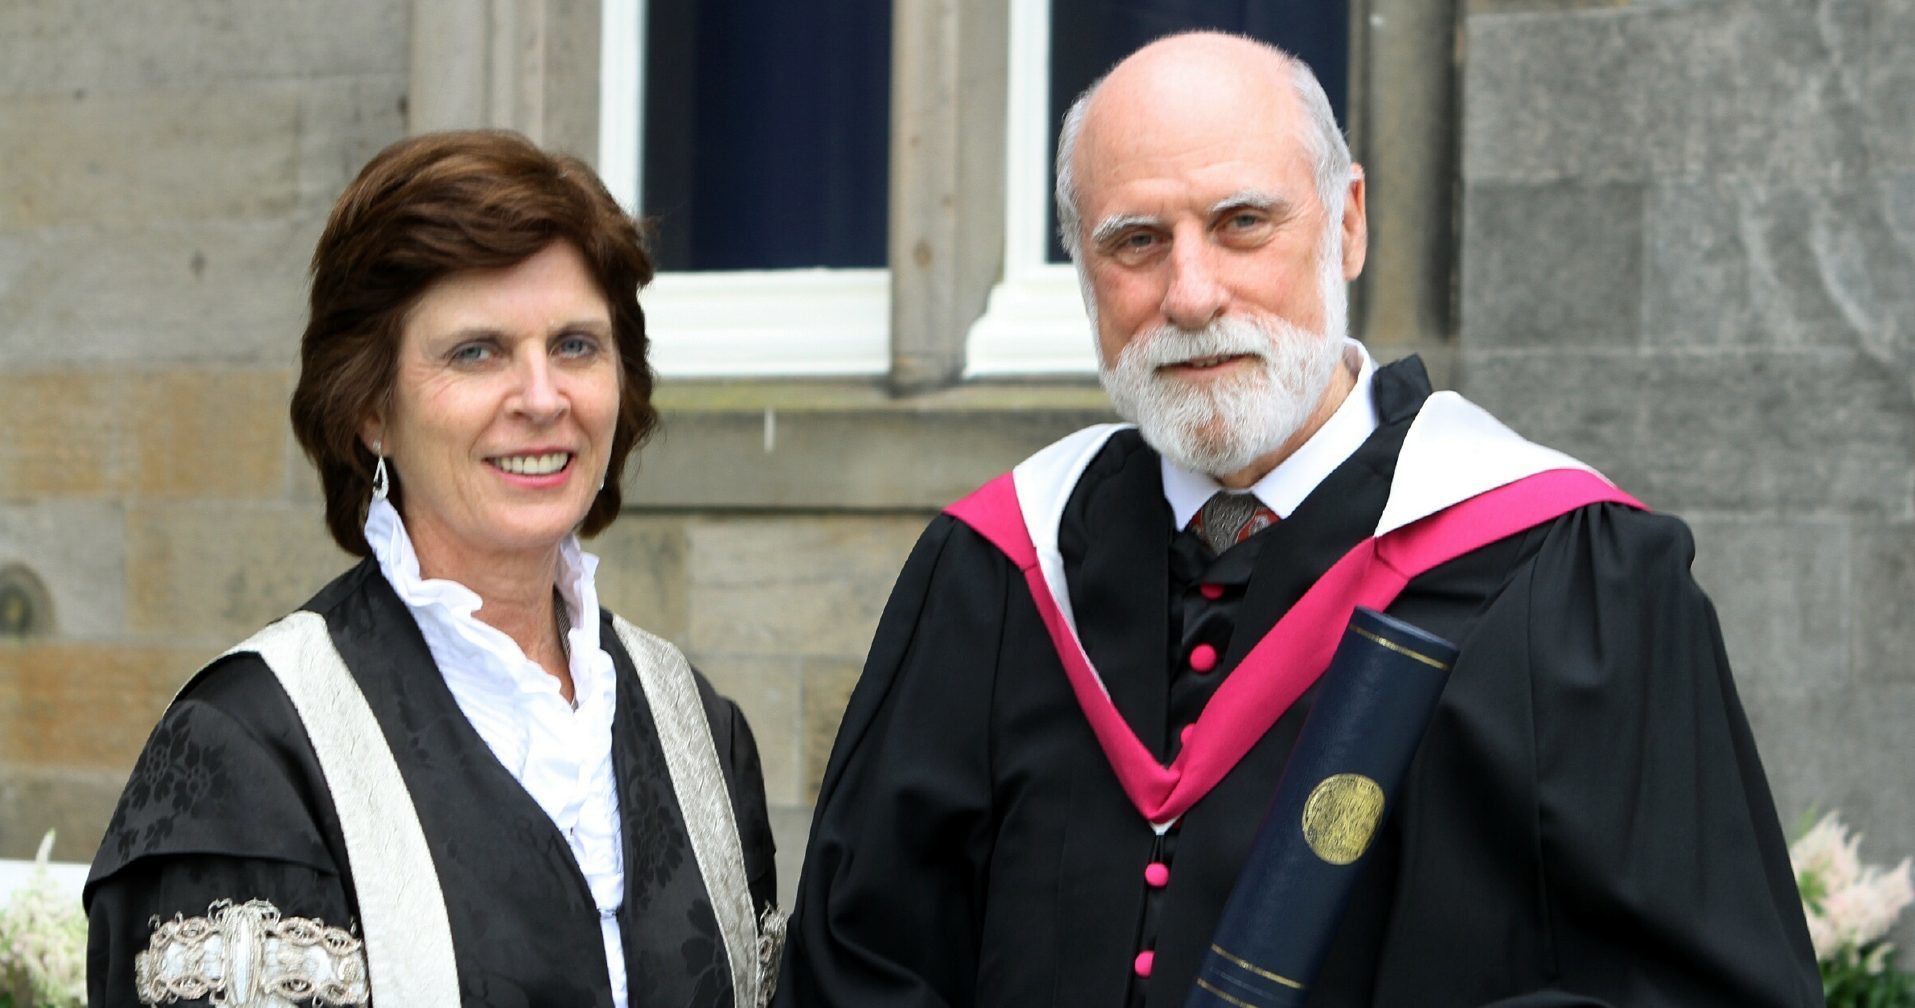 Professor Louise Richardson with internet pioneer Vinton Cerf, who received an honorary degree at St Andrews in 2015